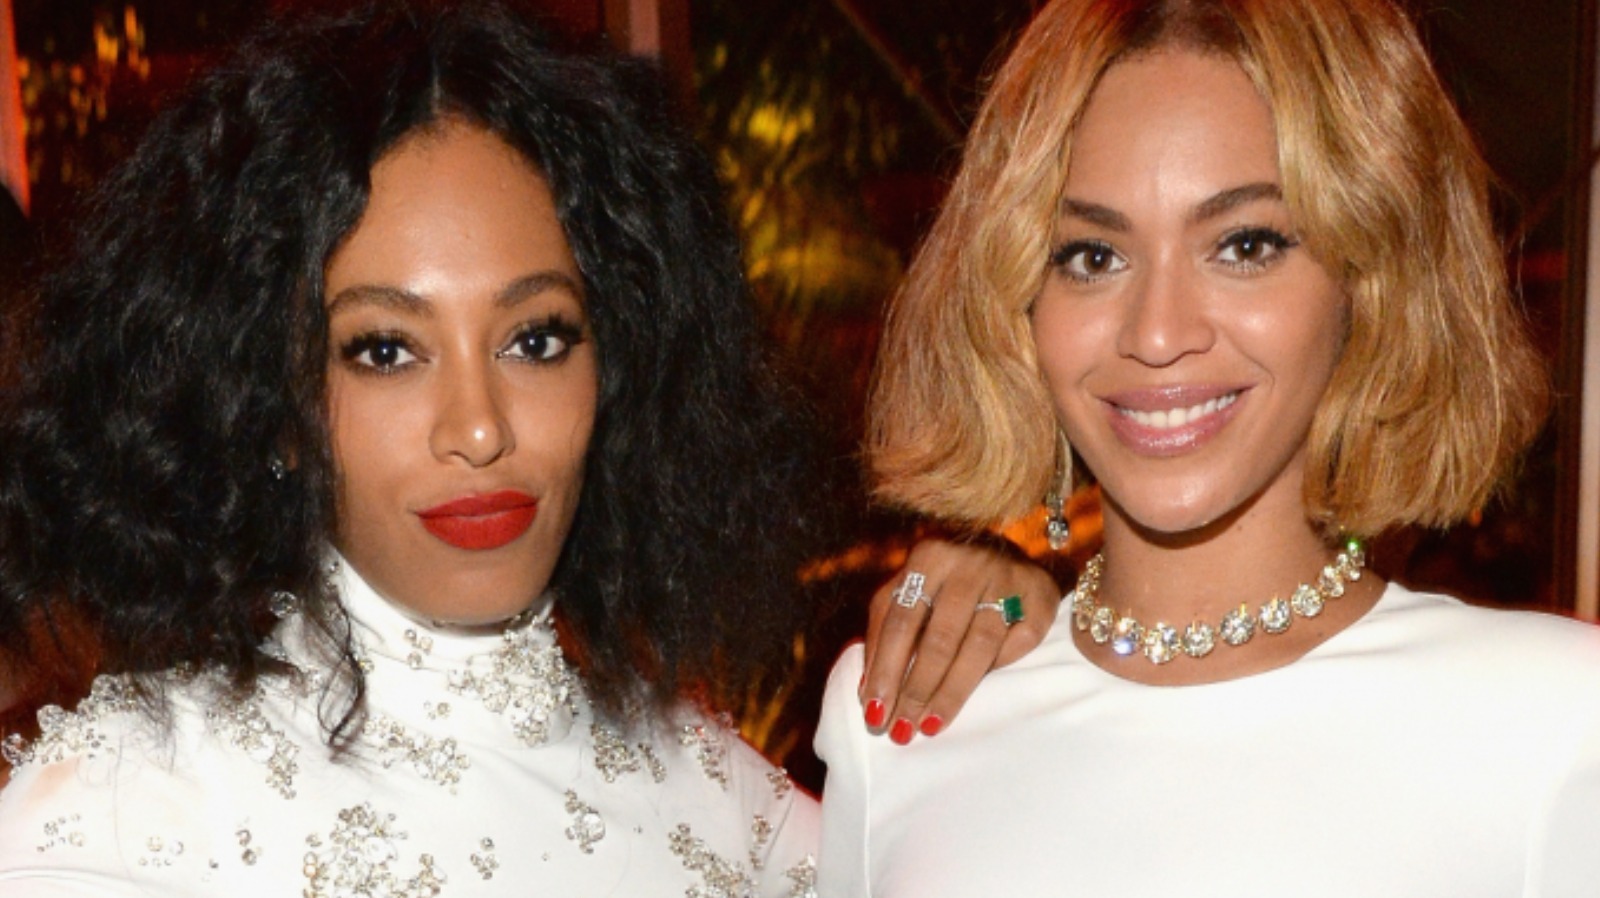 Beyonce Getting Fucked - All The Drama Between BeyoncÃ©'s Sister Solange And Jay-Z Explained